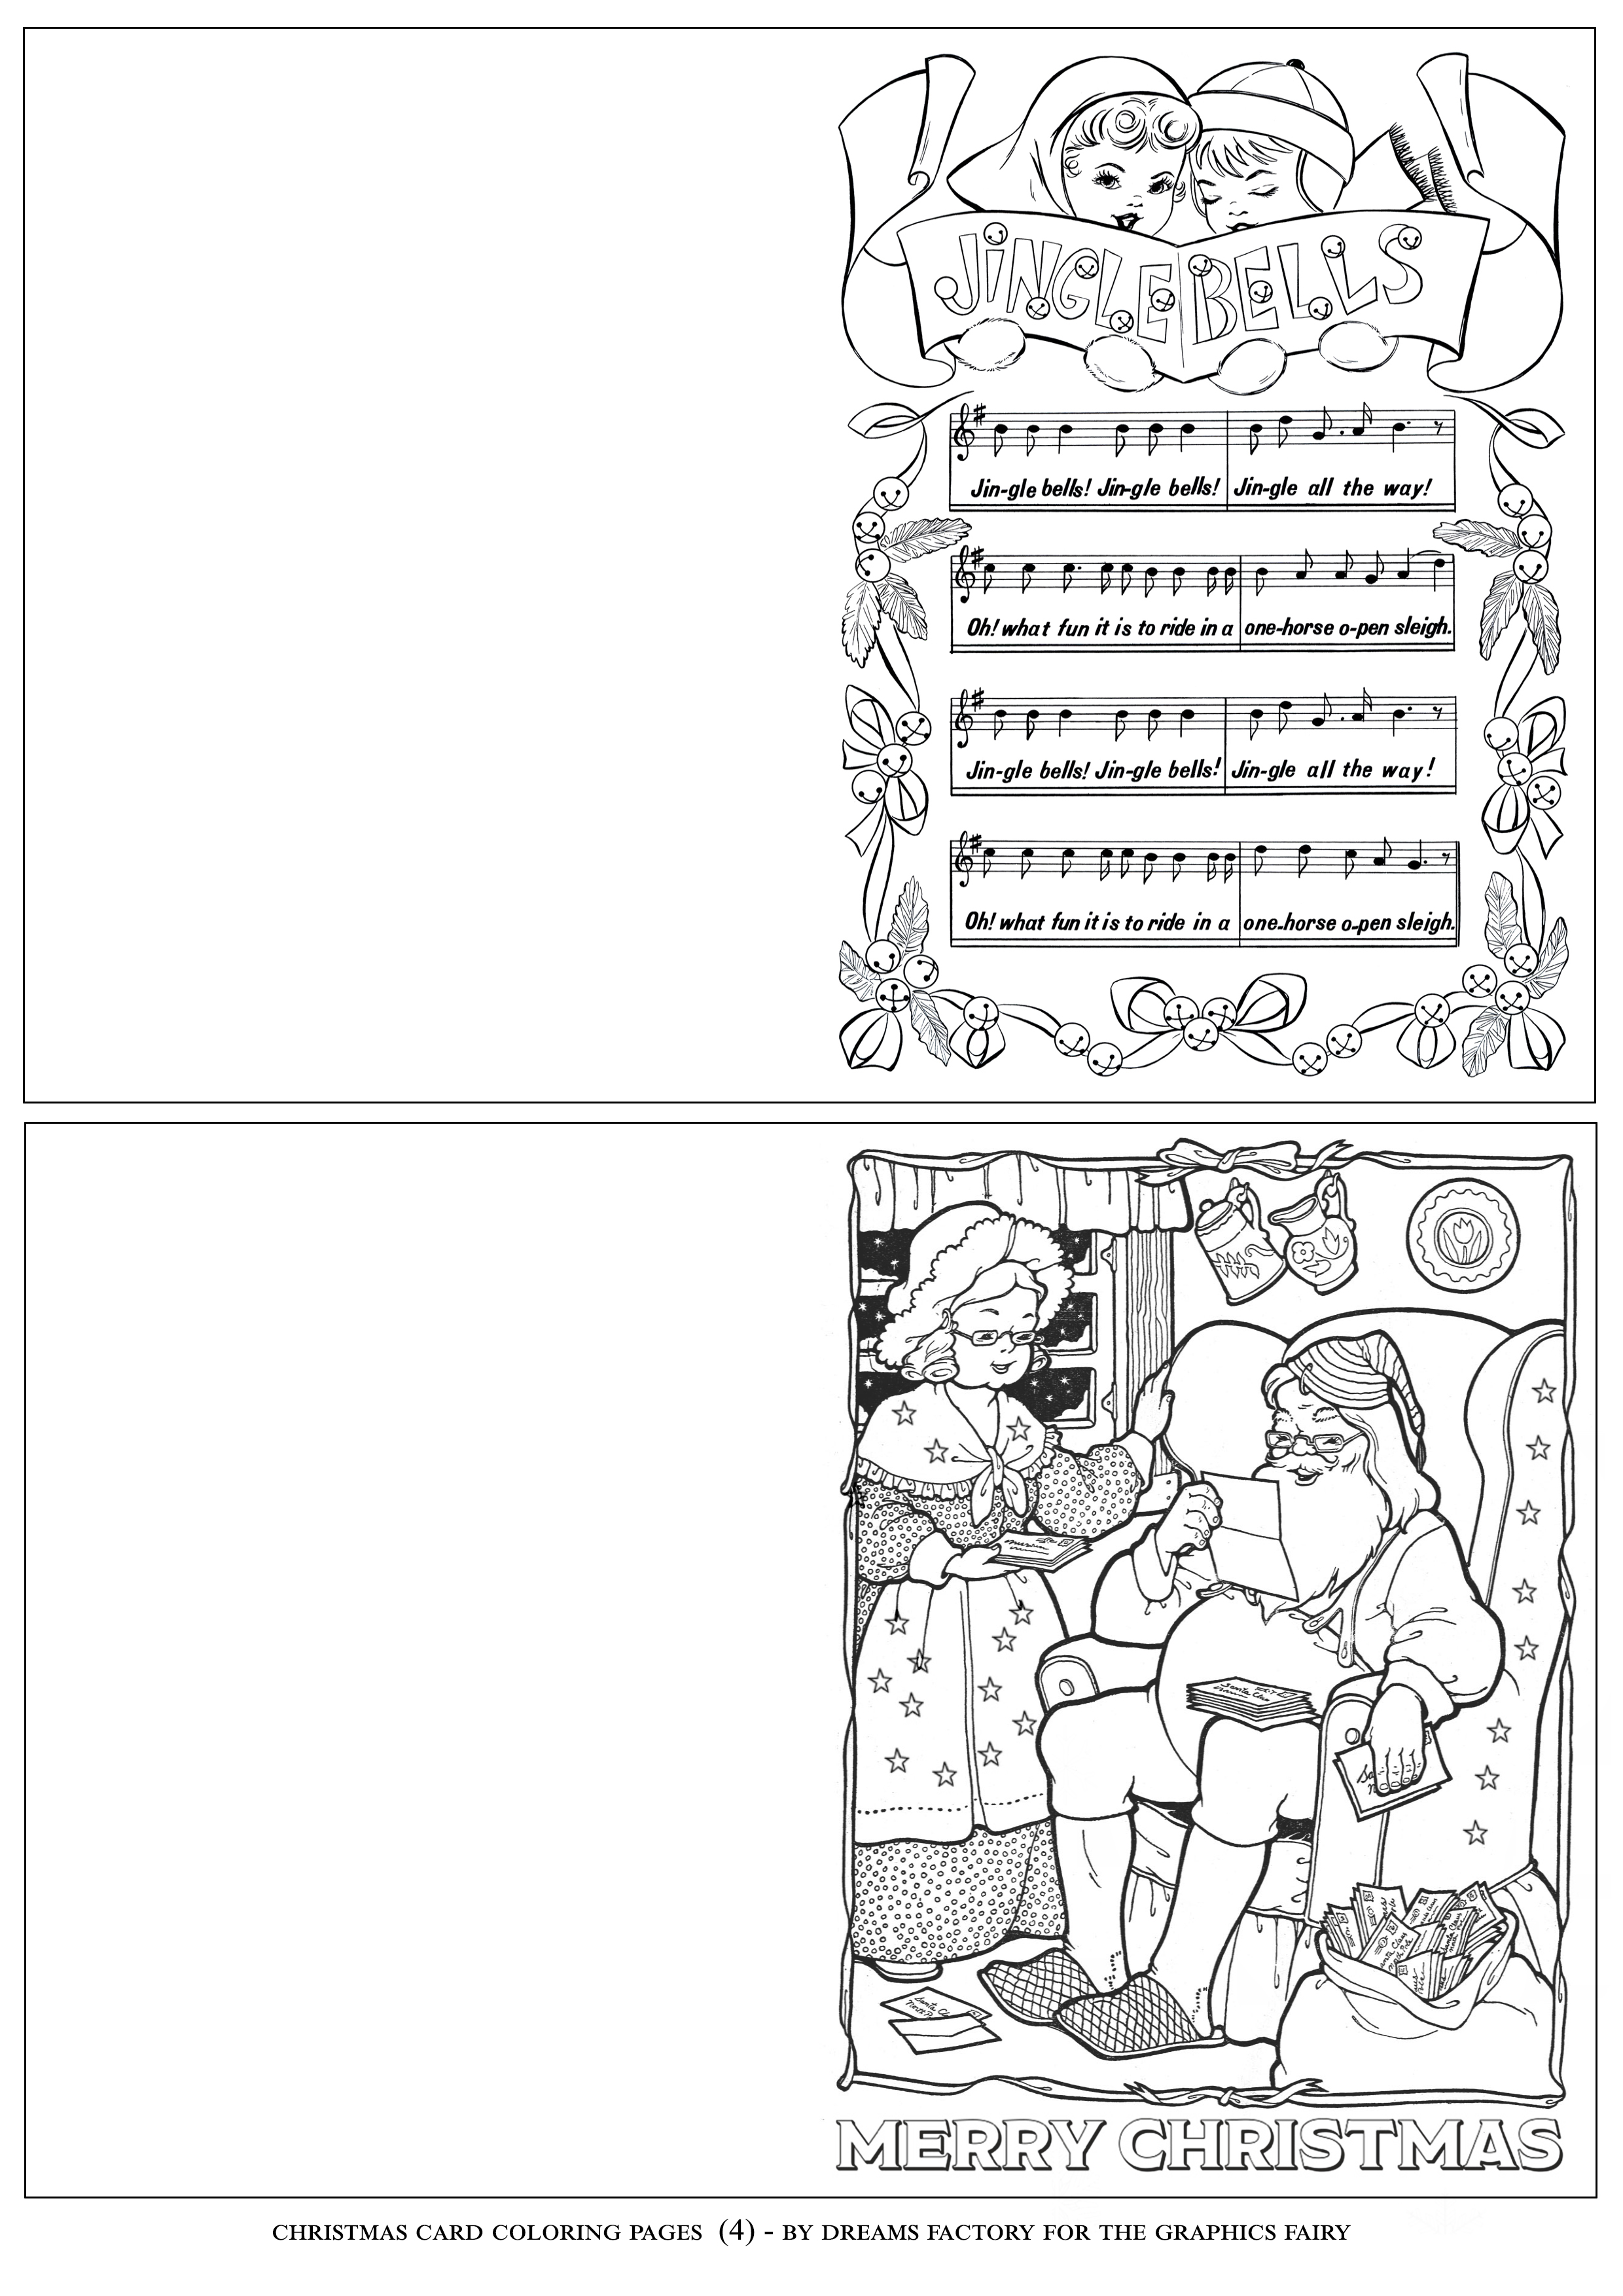 Christmas card coloring pages 4